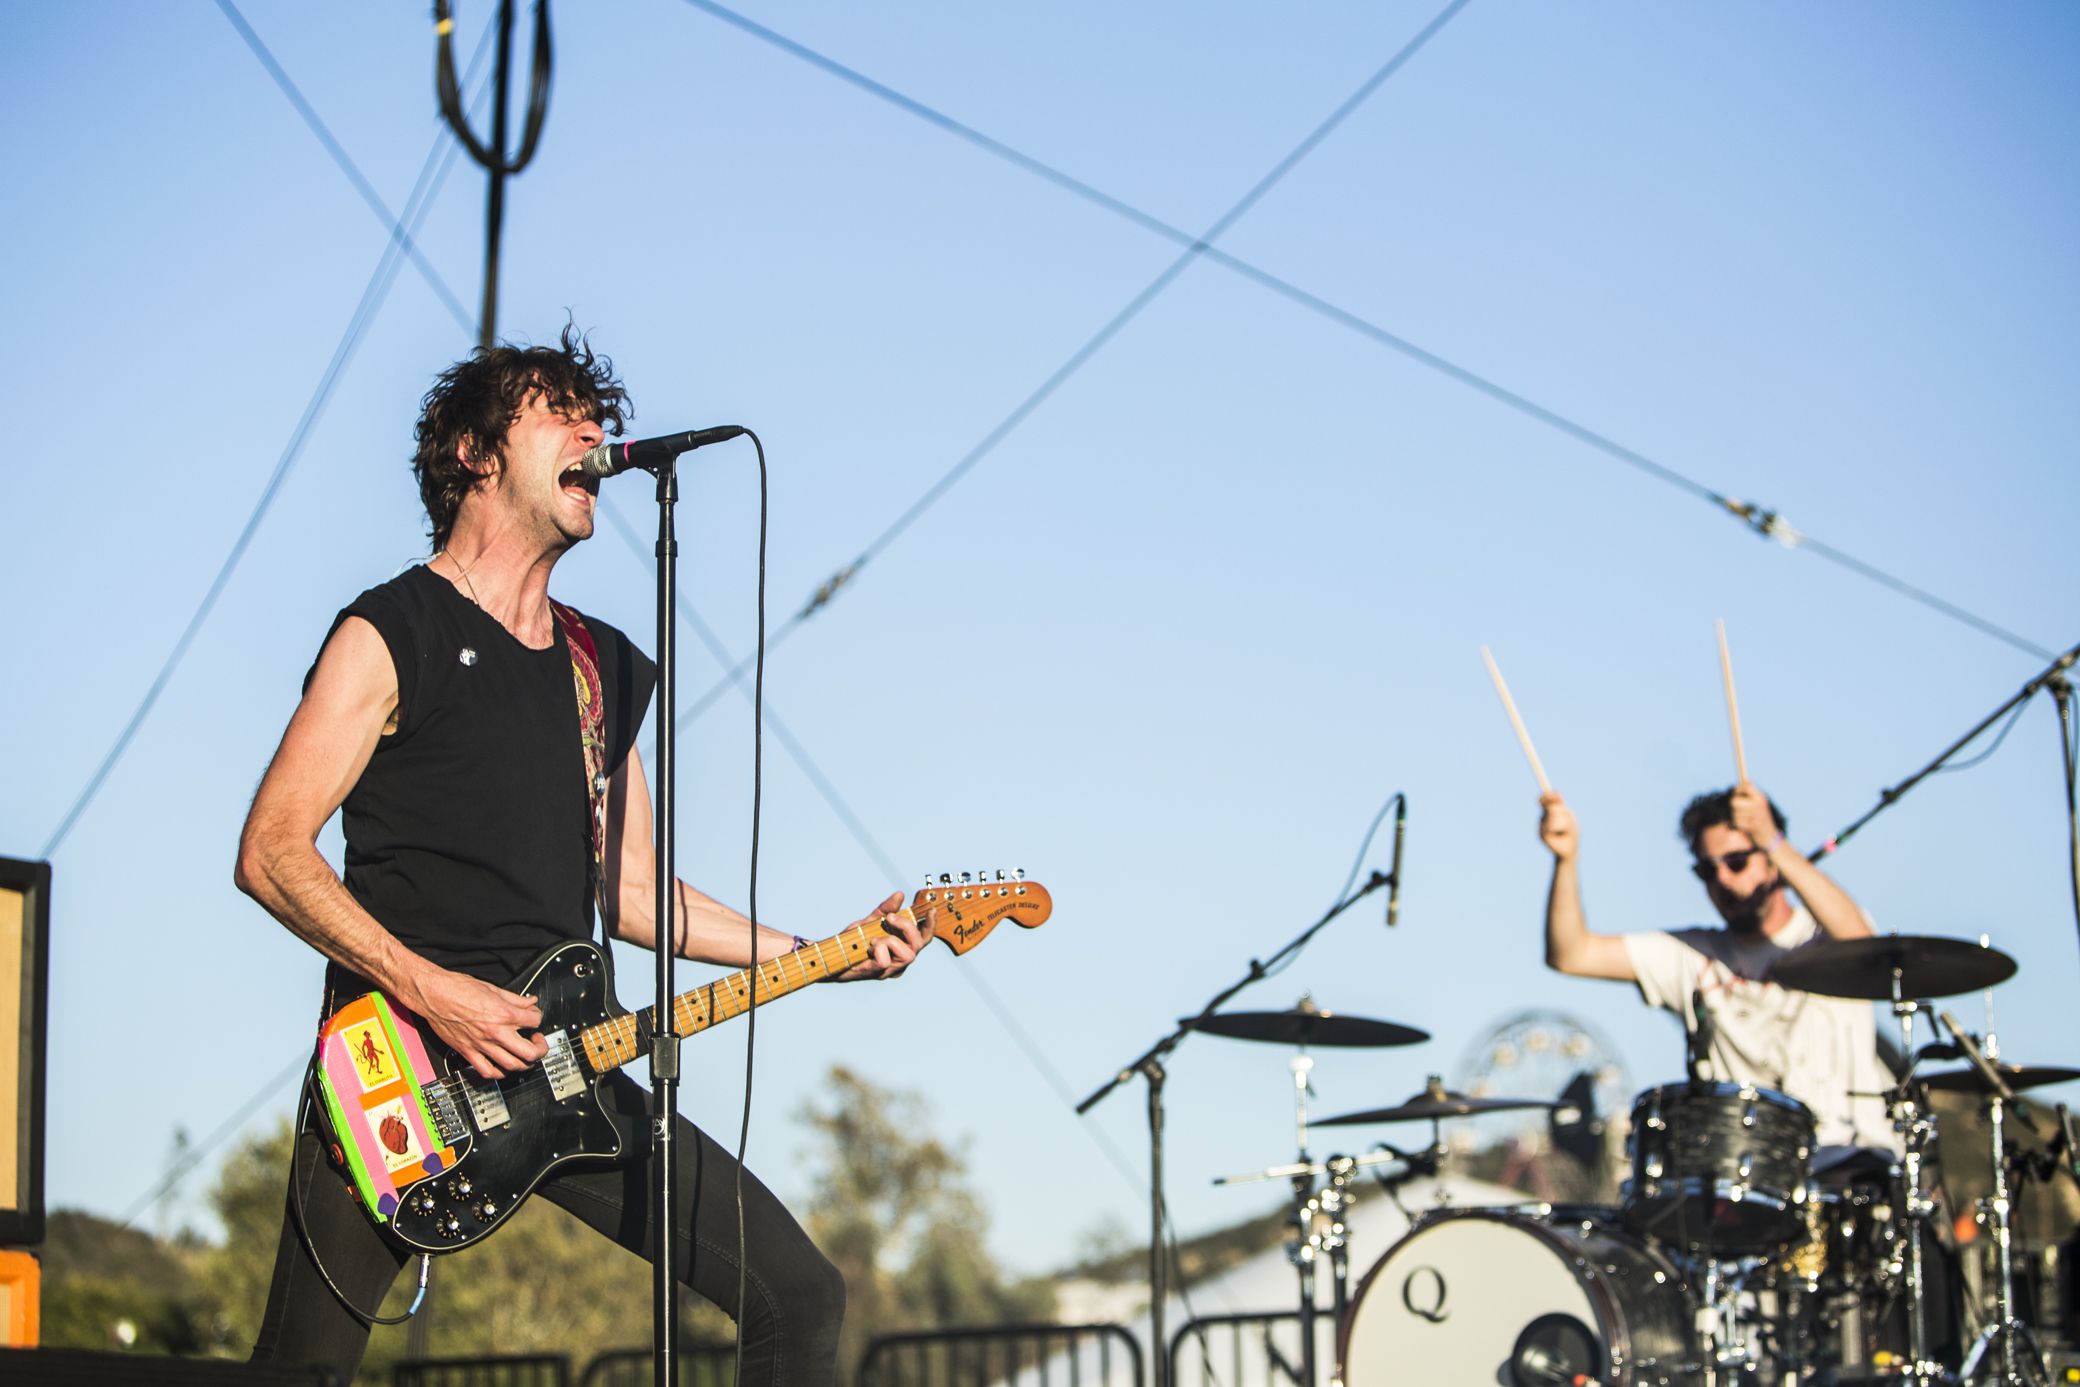 japandroids 7 Cal Jam Offered Everything Youd Want From Dave Grohl